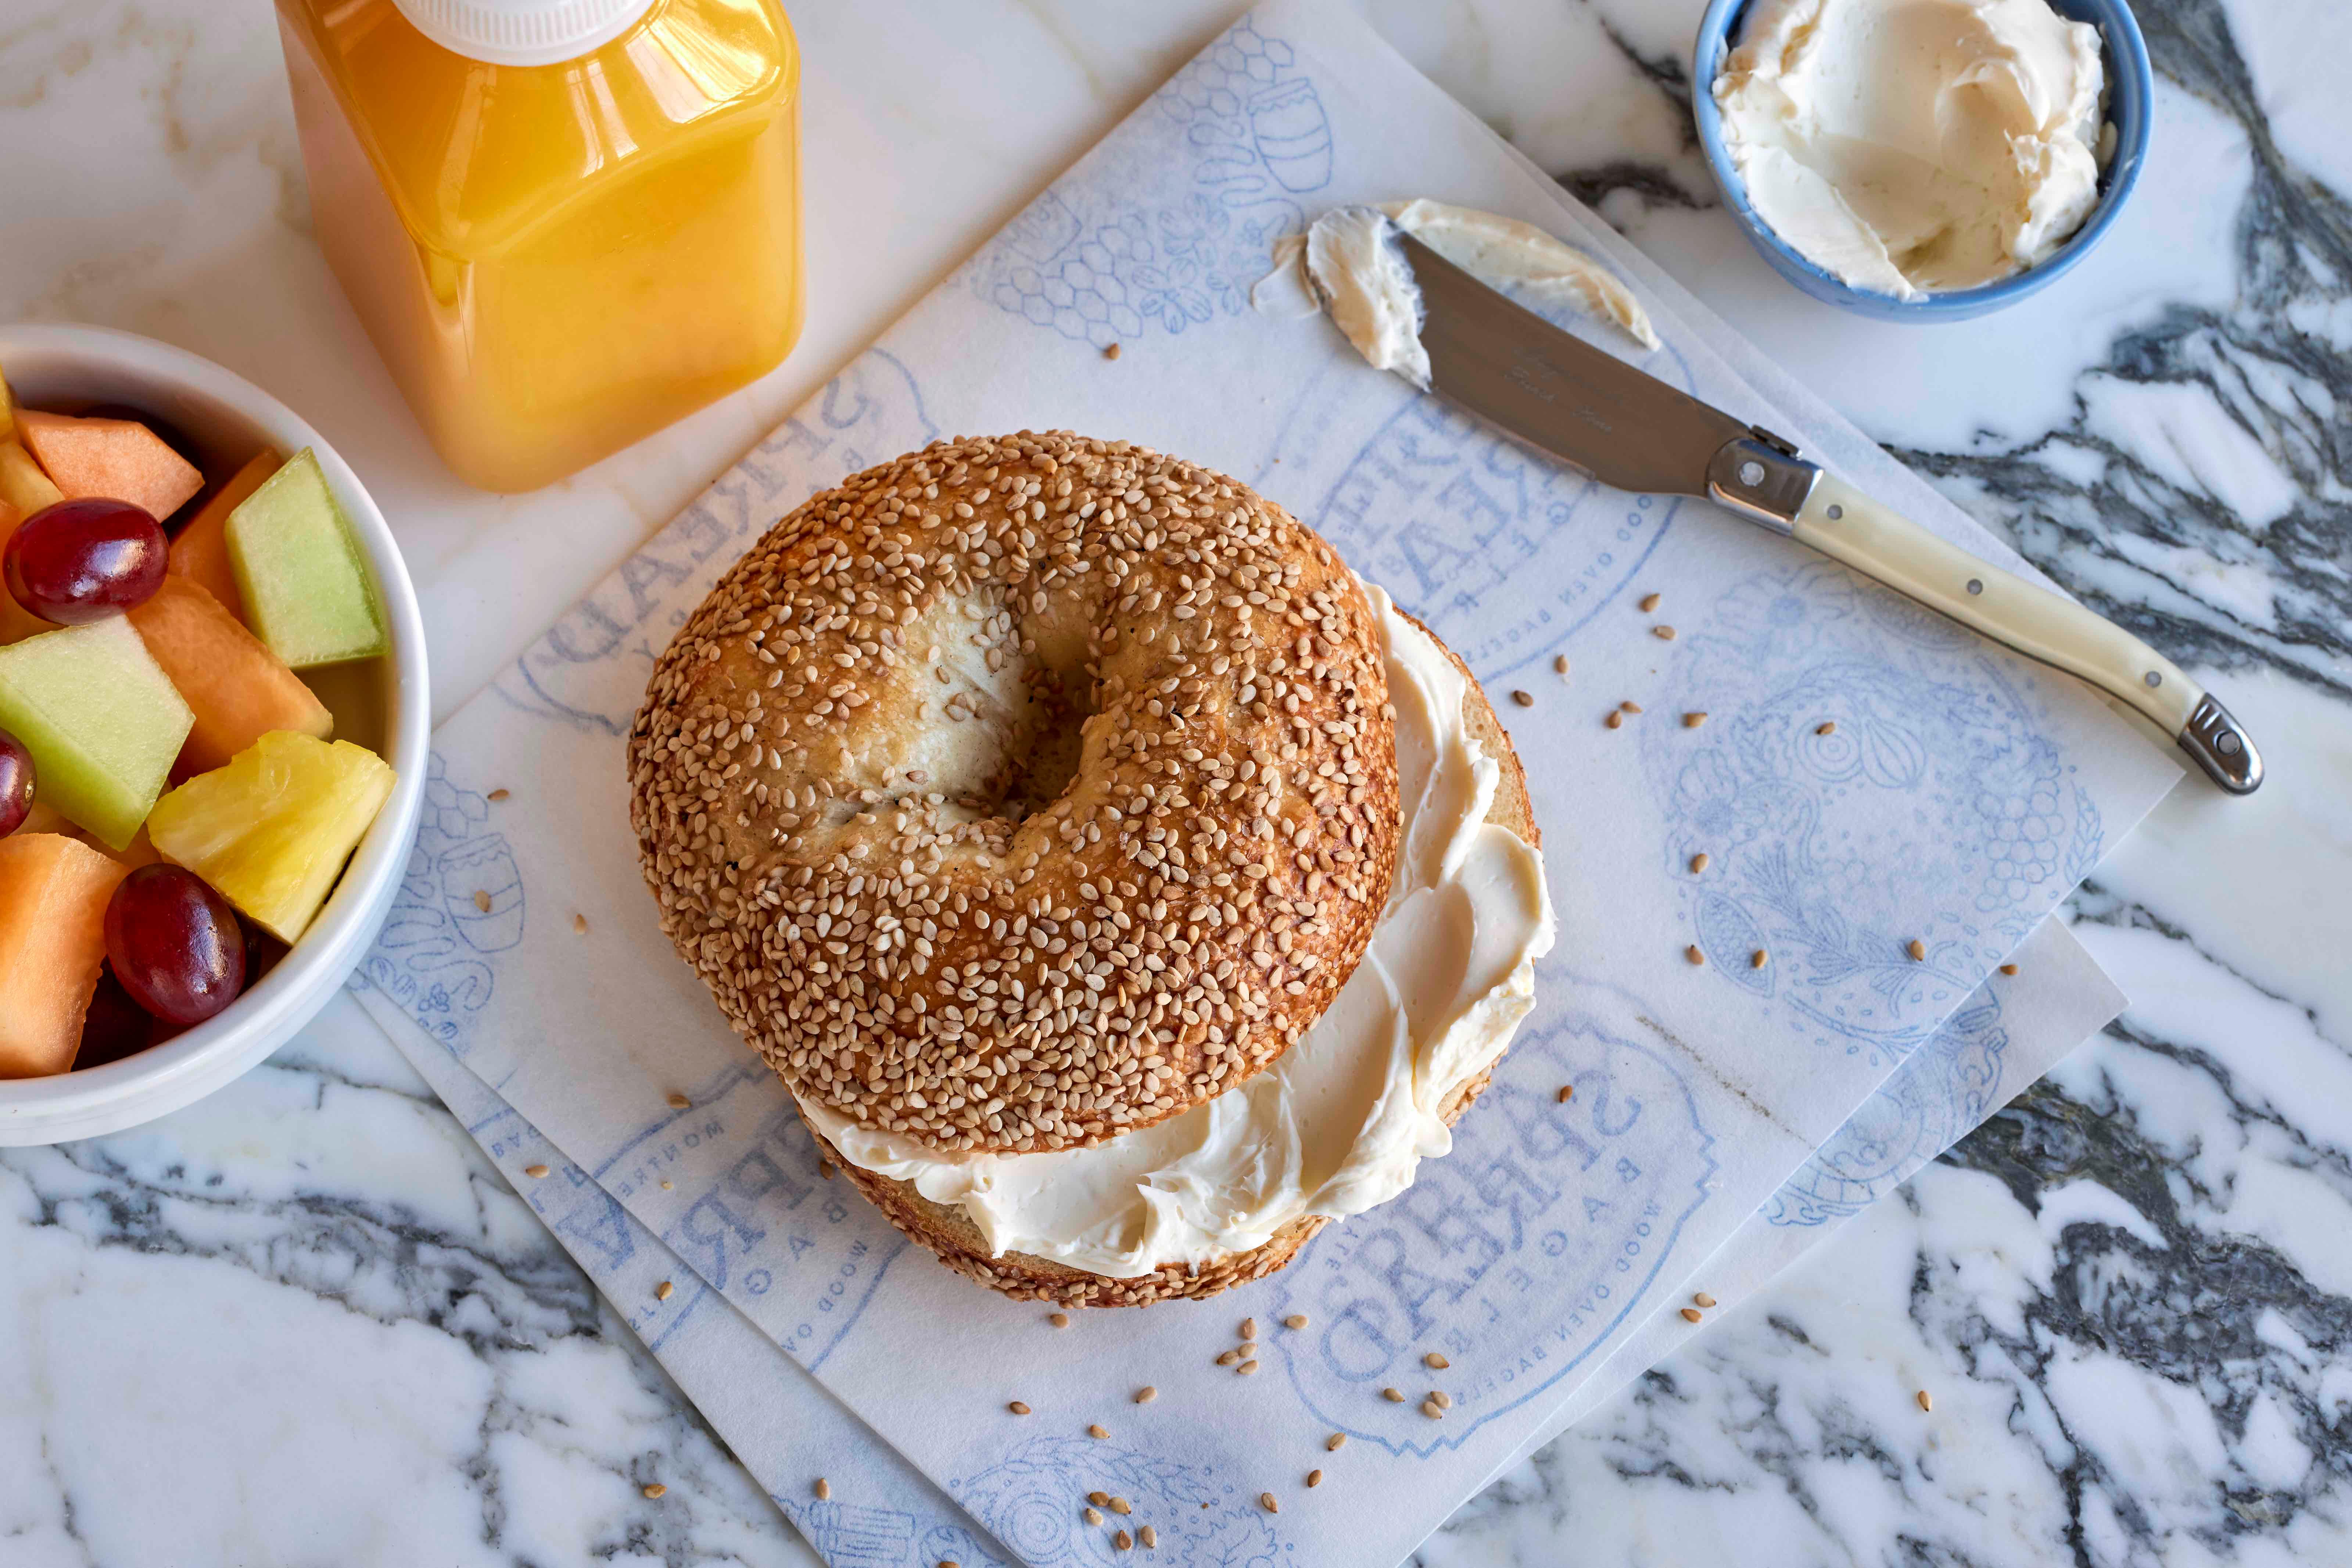 Bagel with Cream Cheese Spread Bagelry King of Prussia (484)810-4900